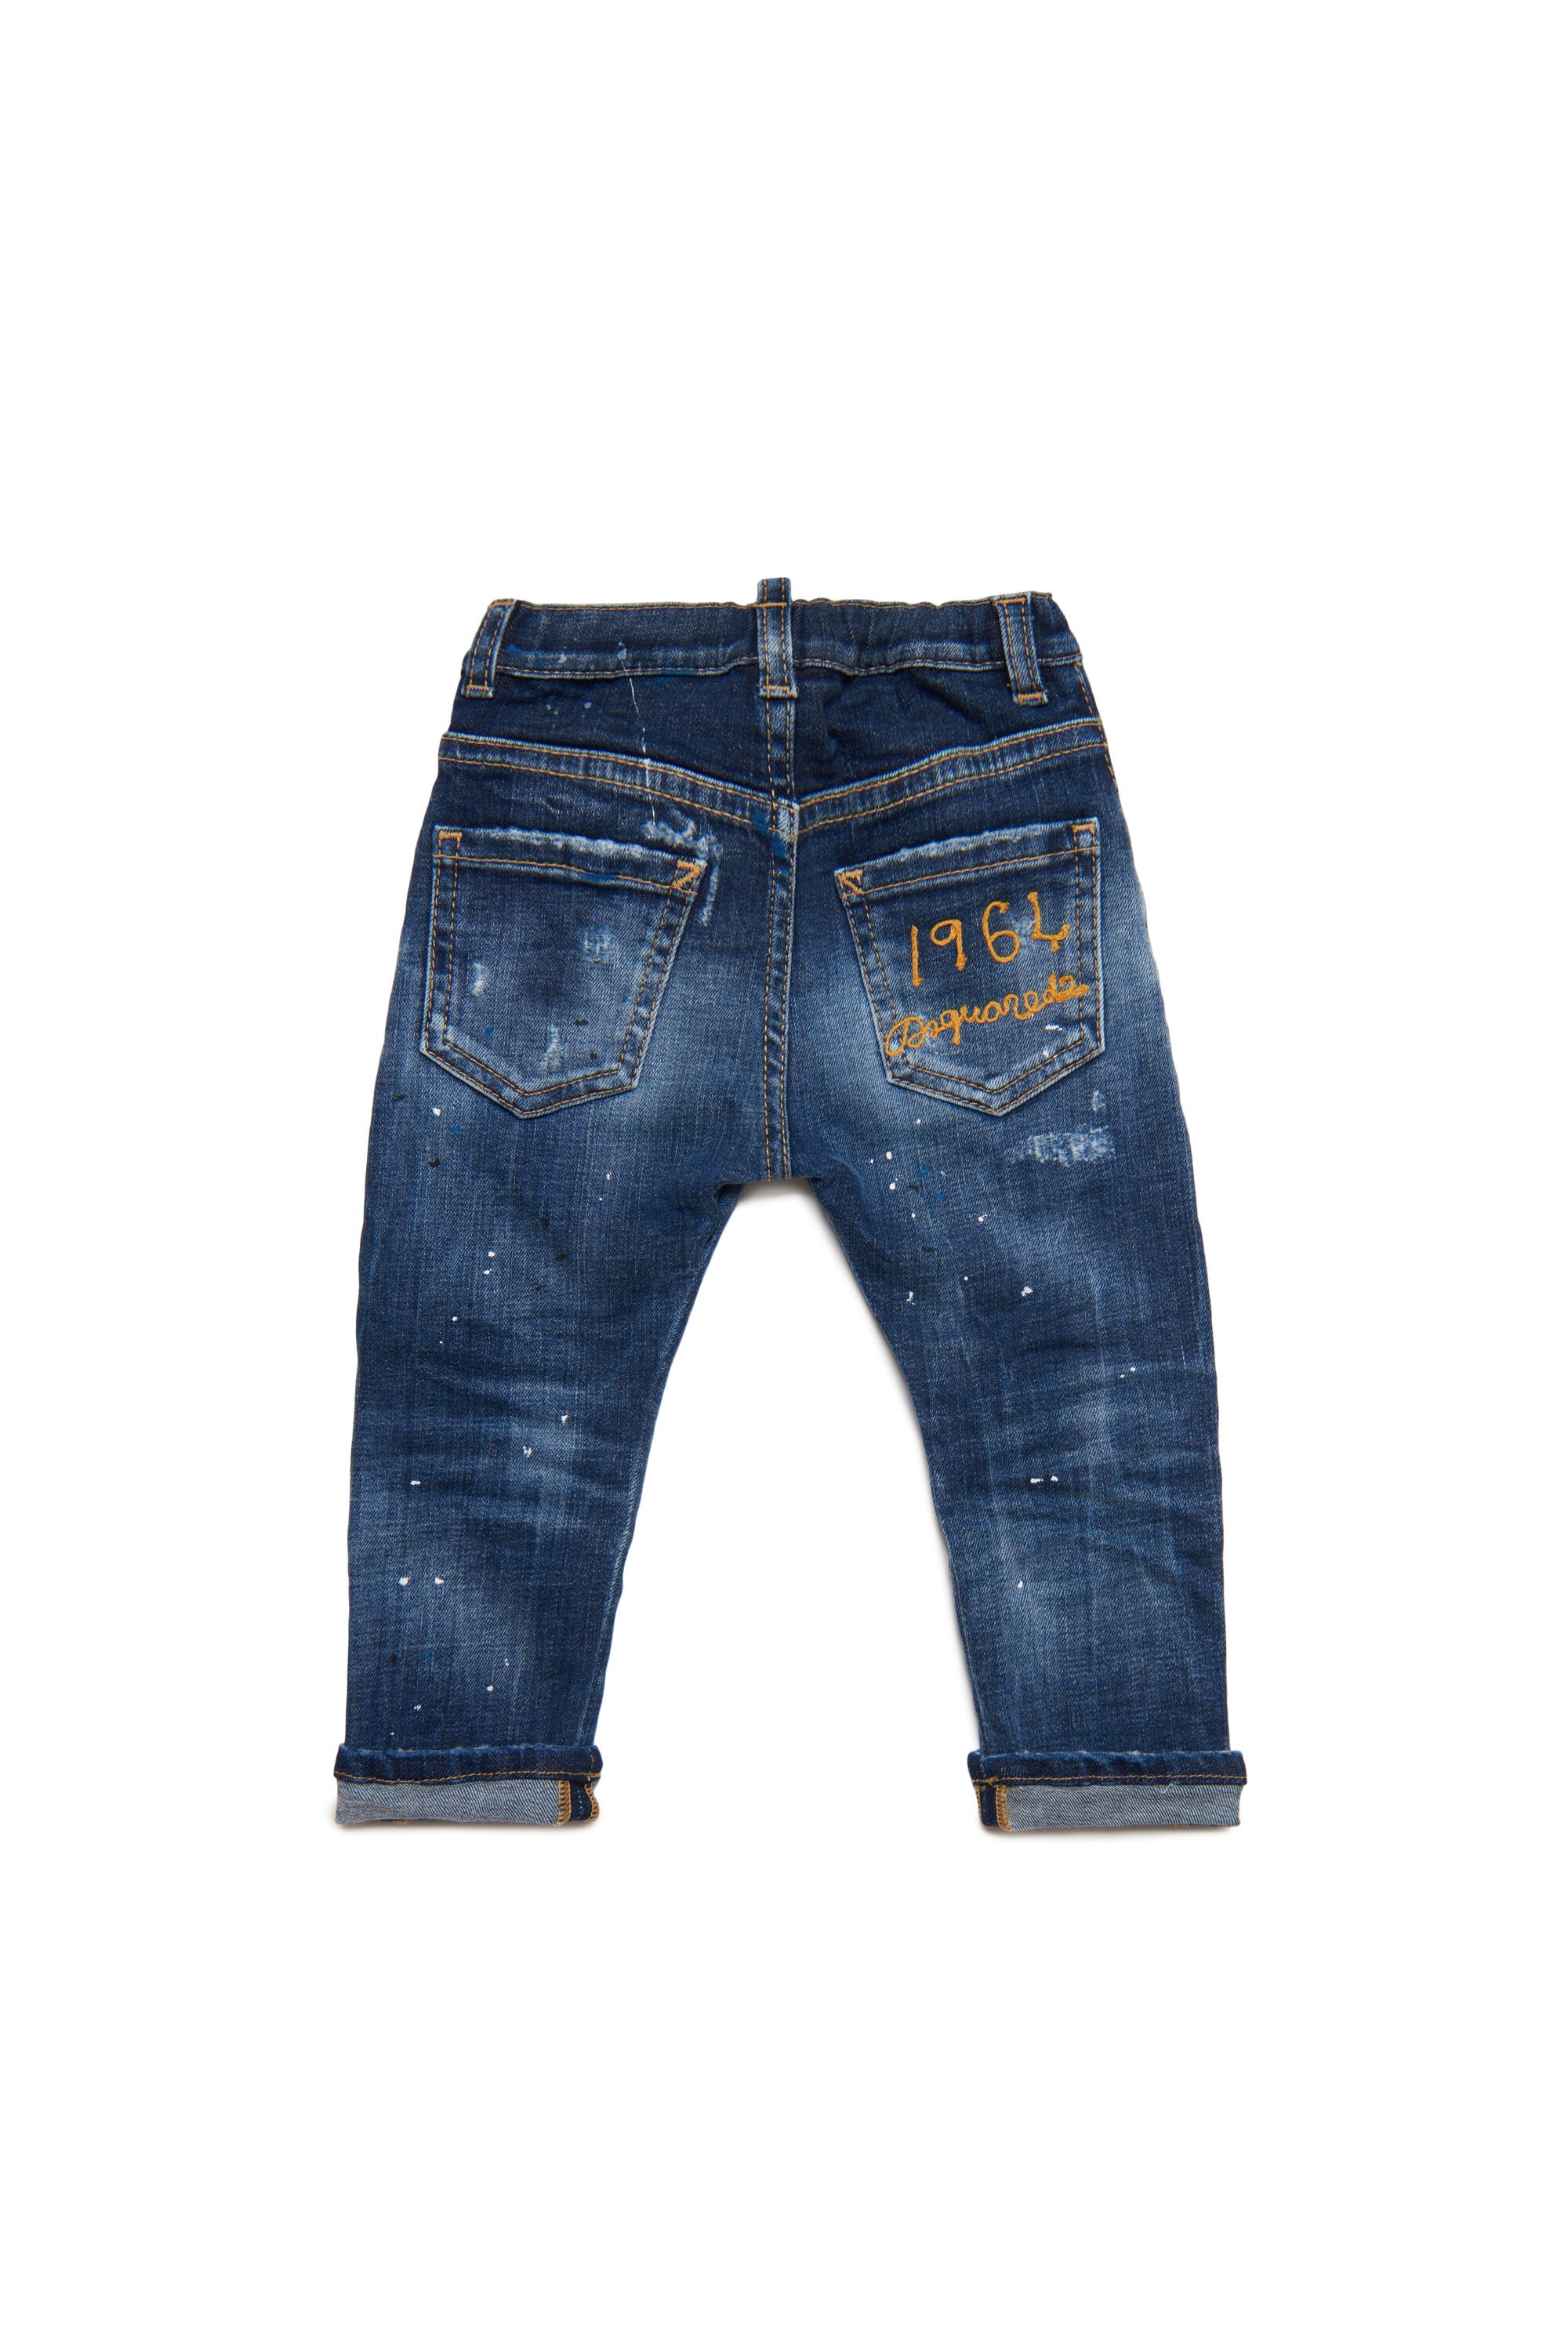 Medium blue shaded jeans with breaks and patches